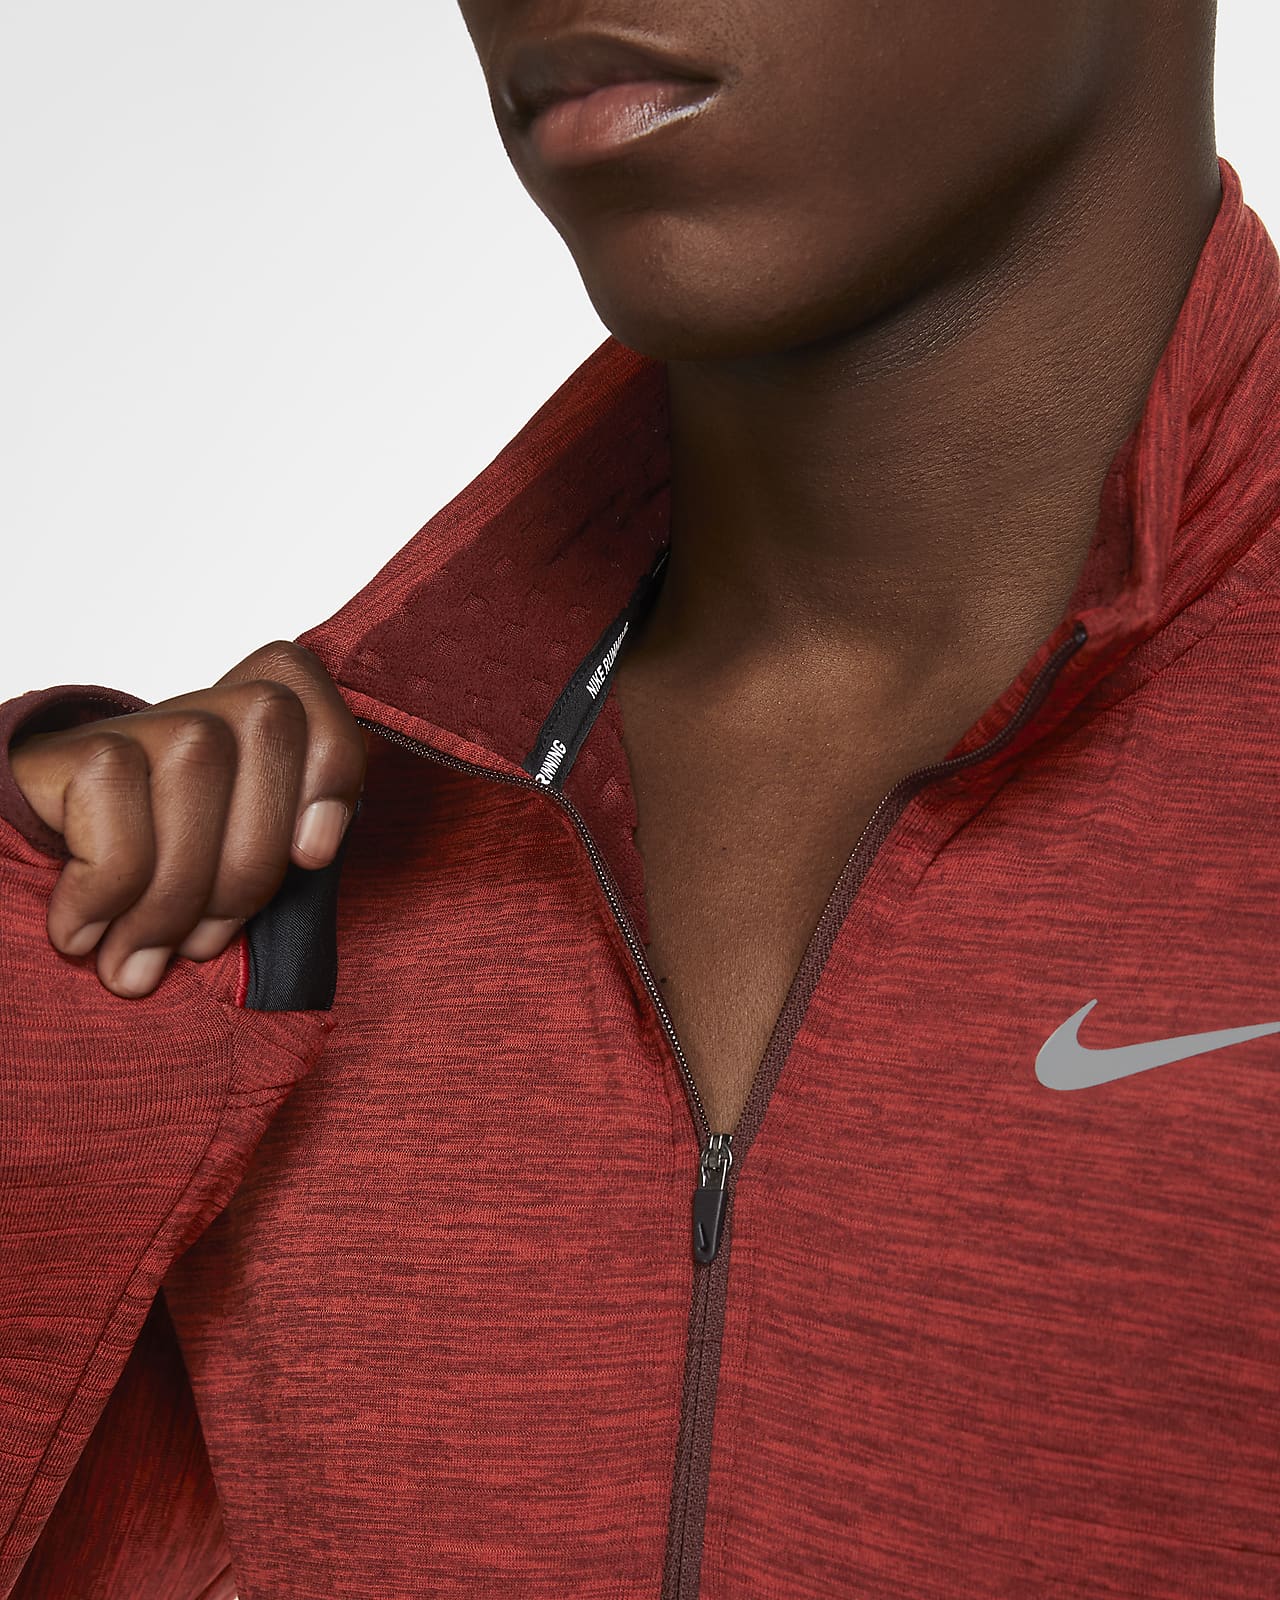 nike running top with hood